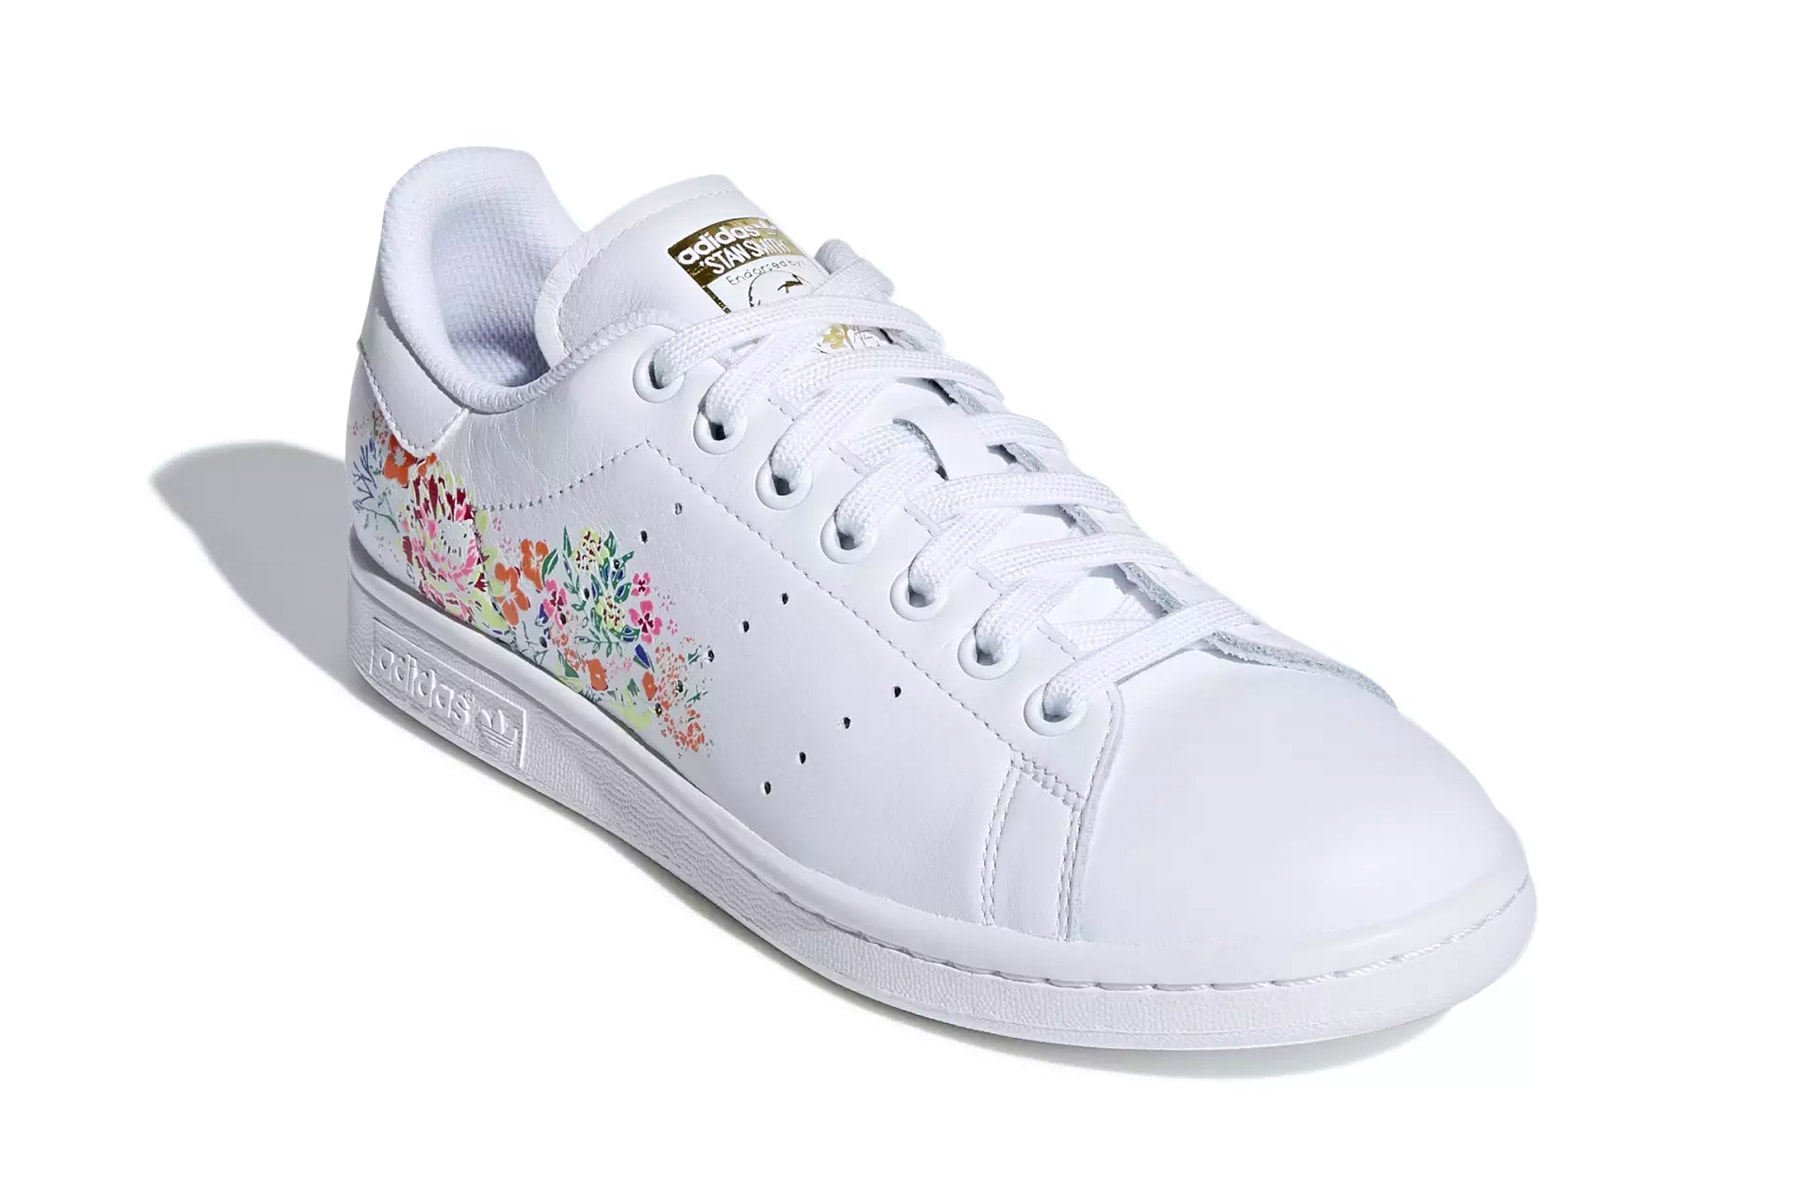 Custom Floral Stan Smiths  How To Make A Pair Of Custom Floral Adidas Stan  Smiths 